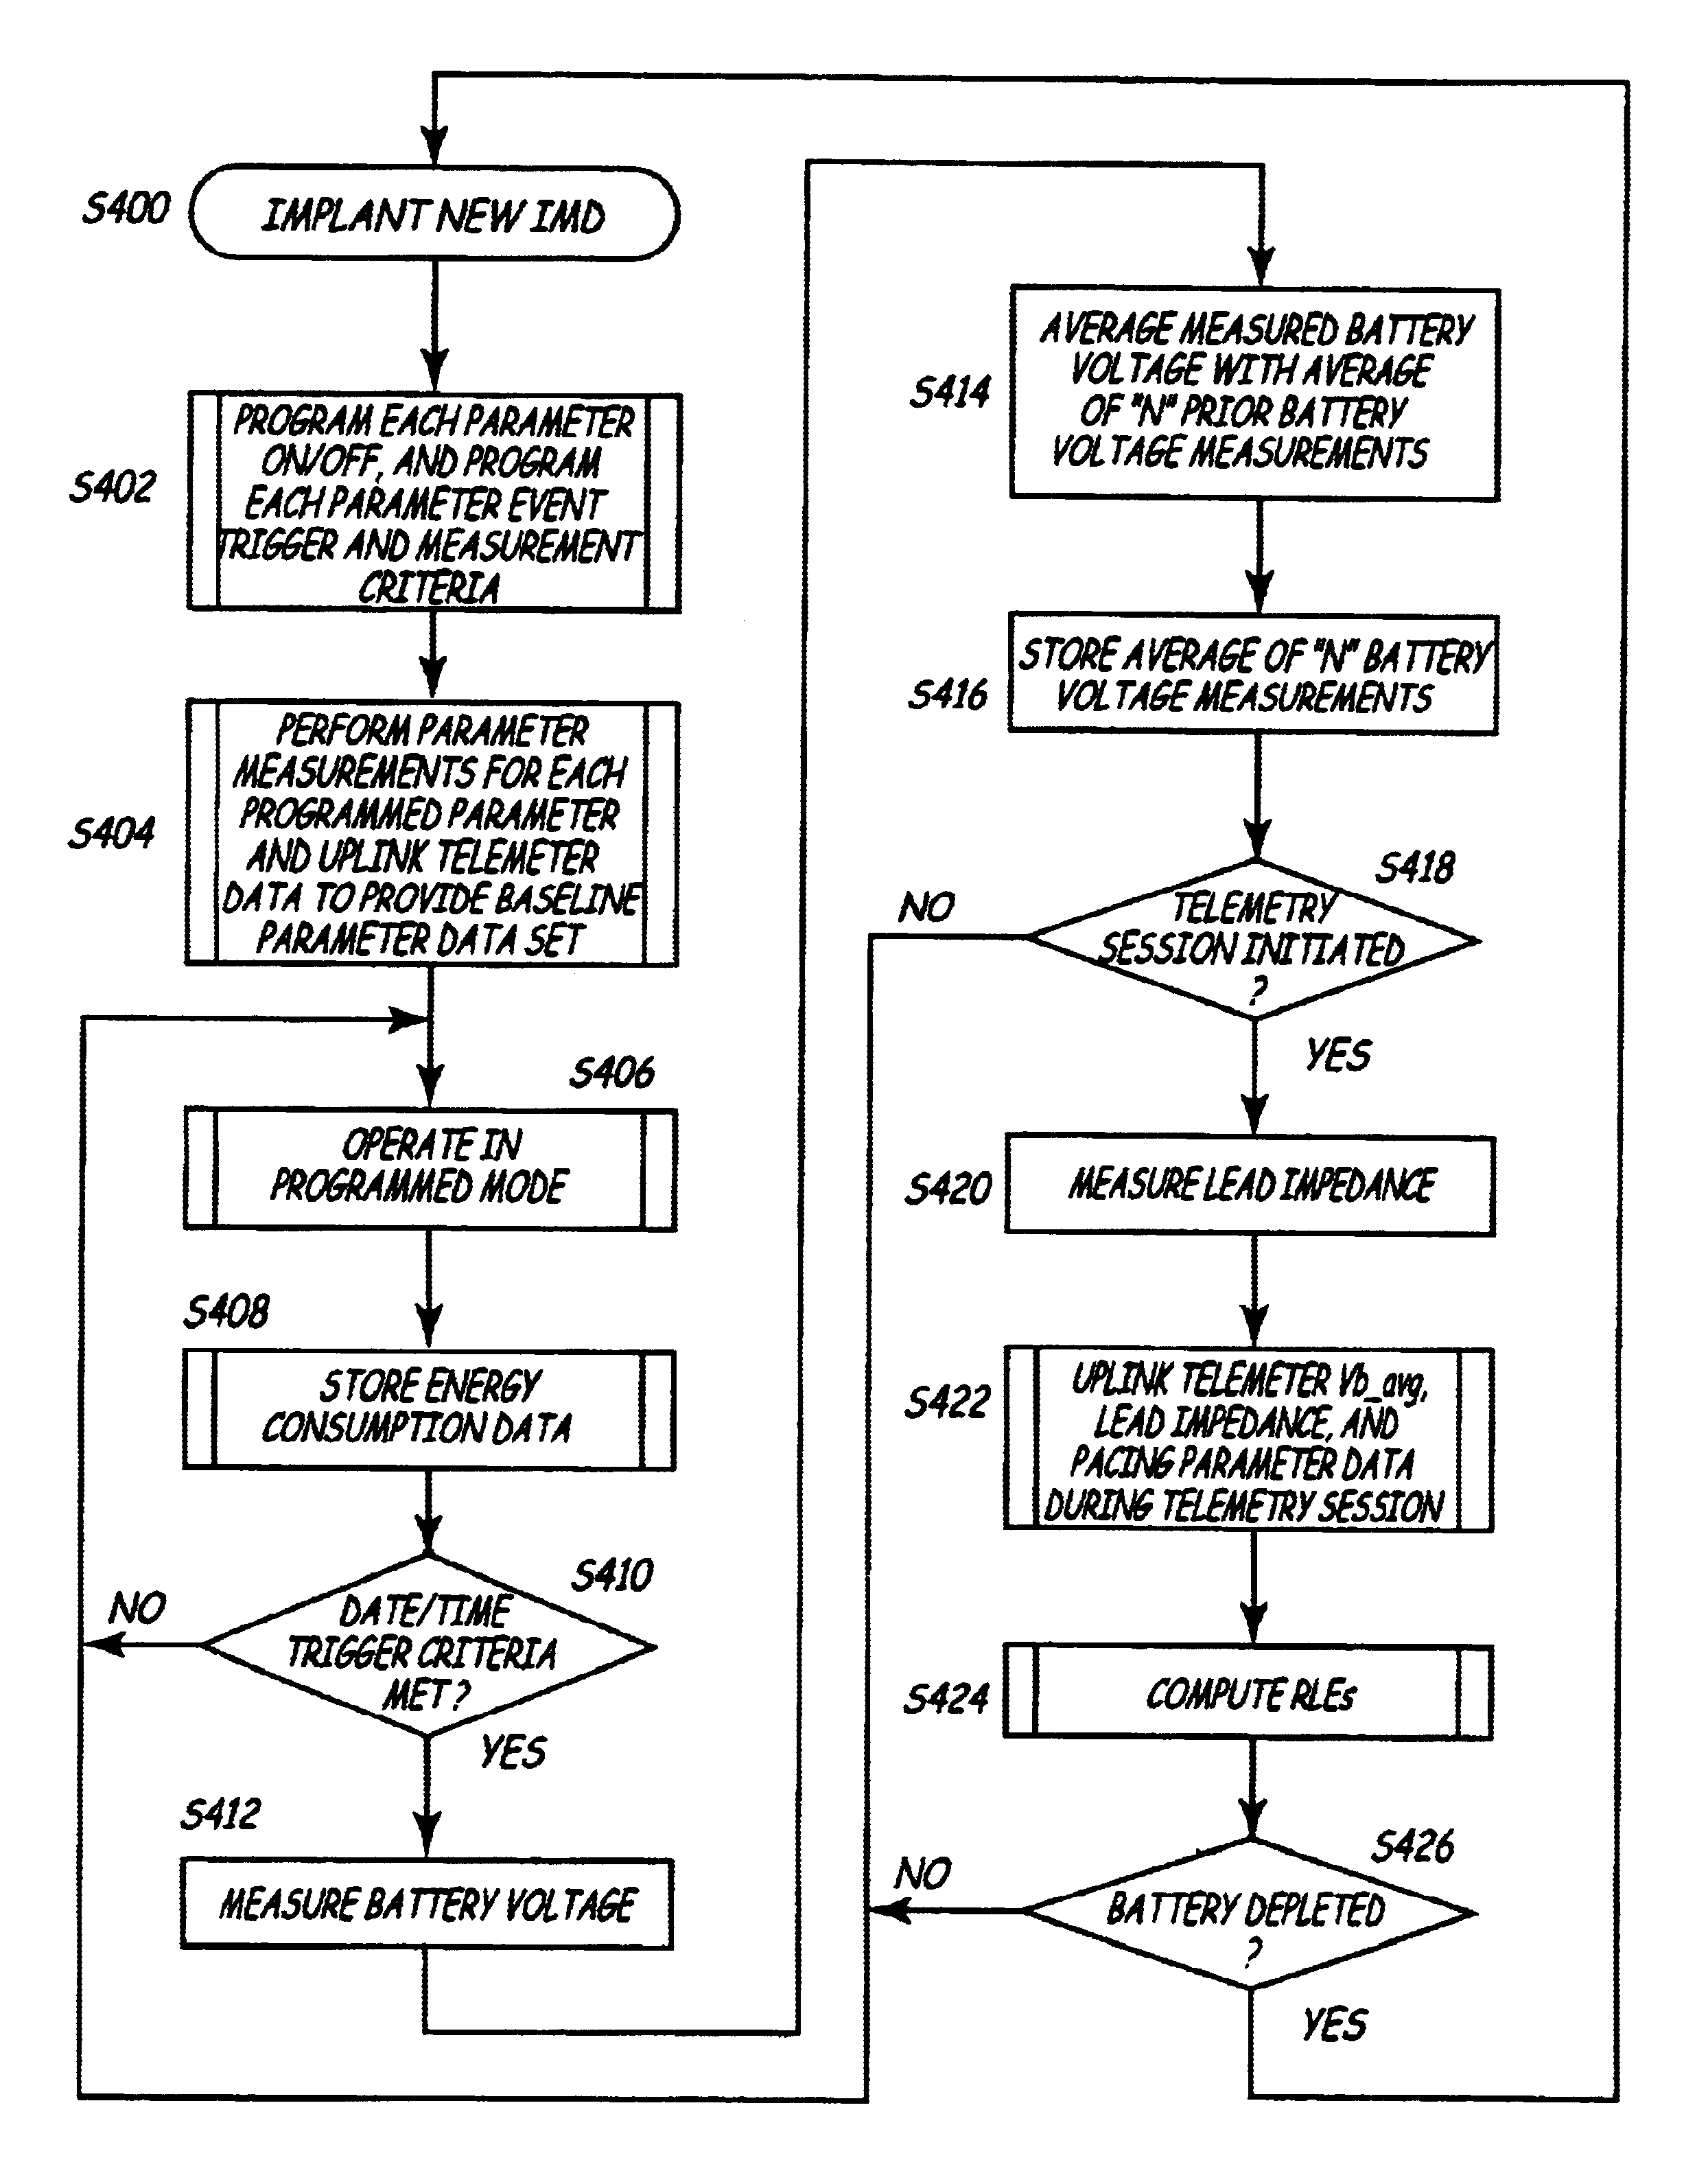 System and method for determining remaining battery life for an implantable medical device